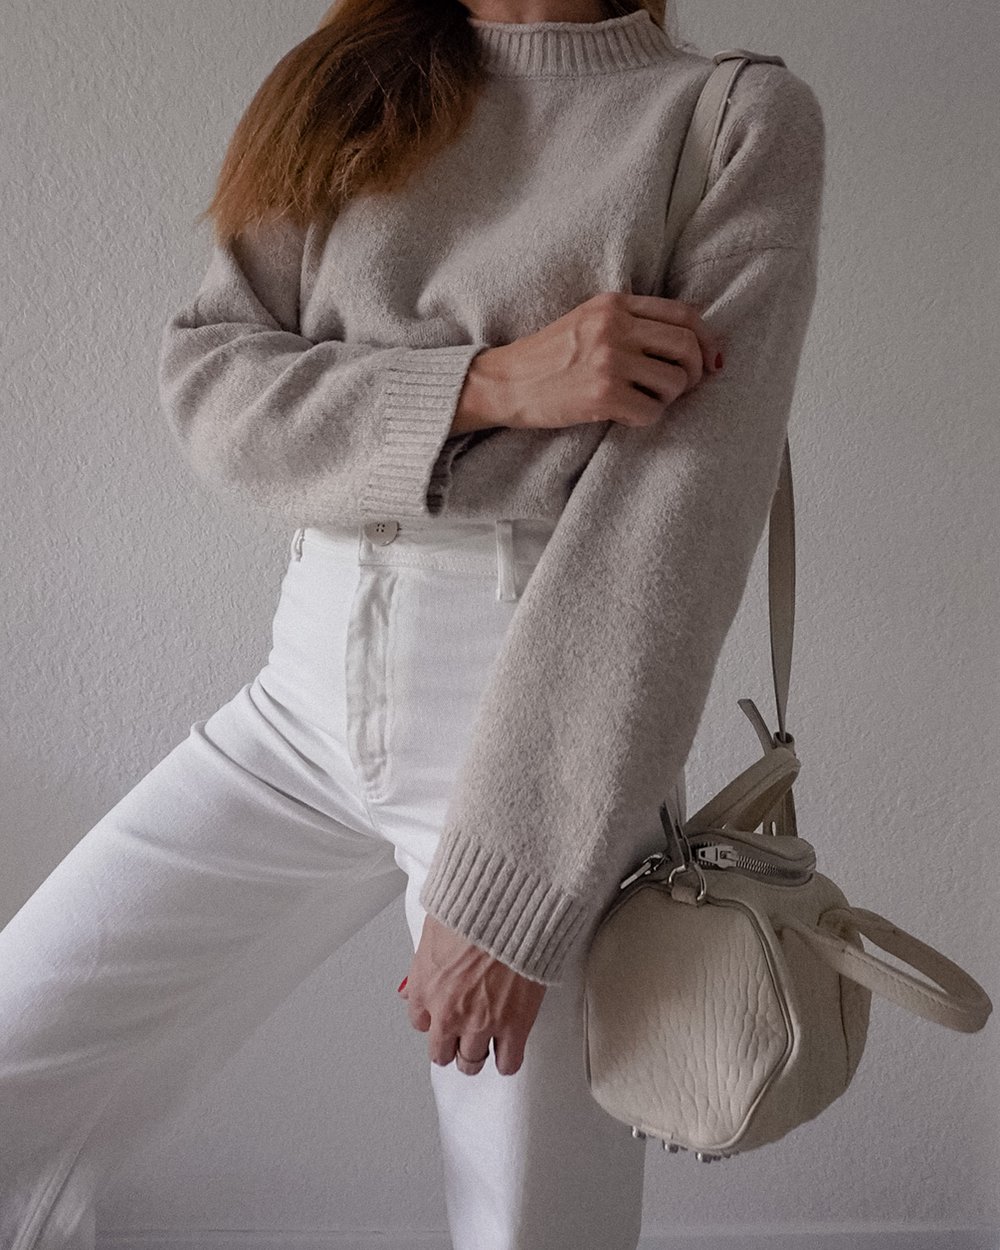  hellojessicashley wearing ZARA ecru high waist pants, Nordstrom sweater with Alexander Wang Rockie handbag, showing how to style beige off-white pants for a classic look 